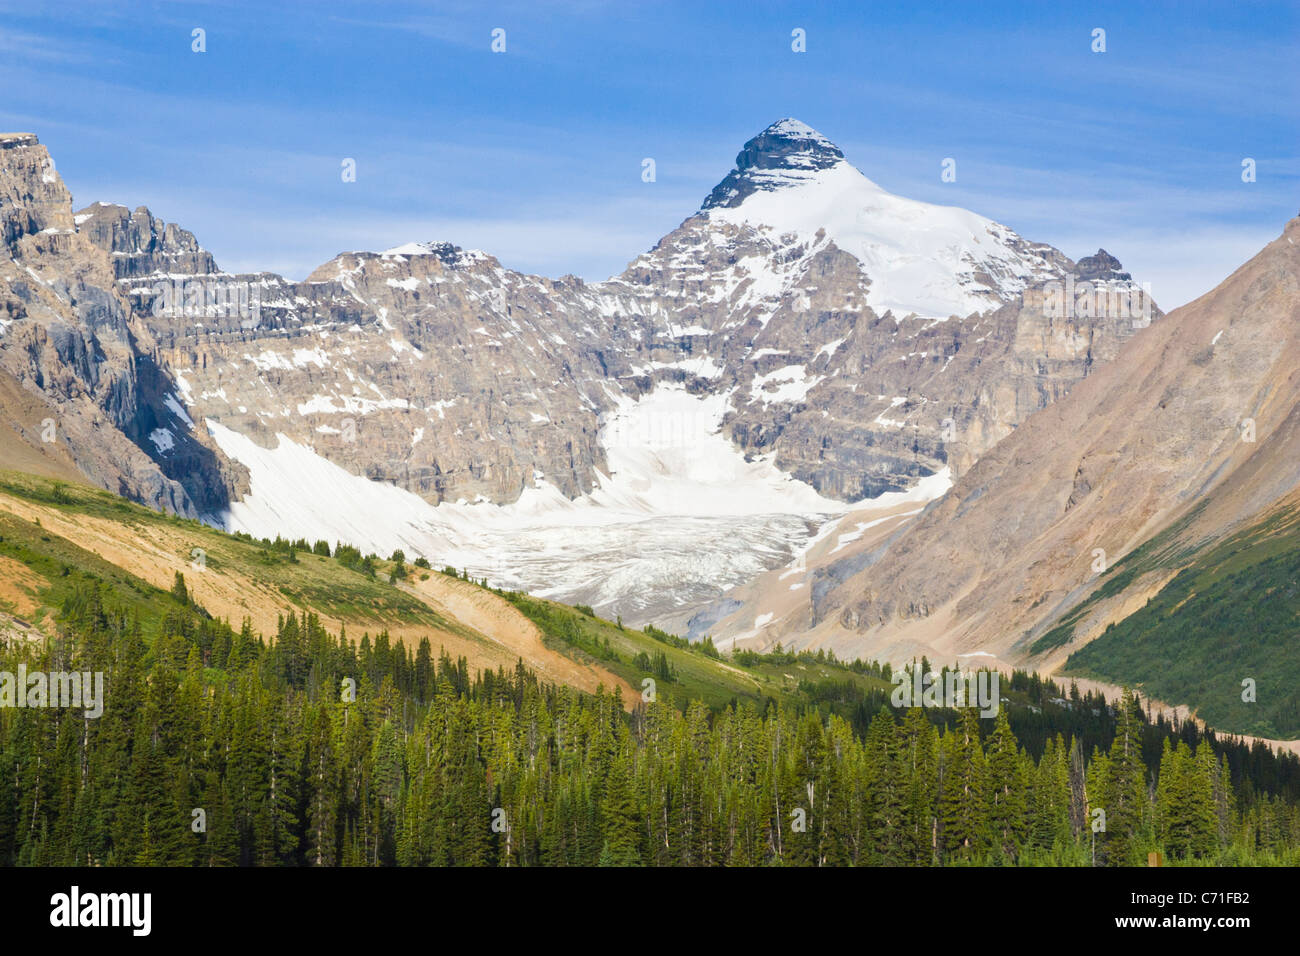 The Saskatchewan Glacier in the Columbia Icefields on the Icefields Parkway  in Alberta, Canada Stock Photo - Alamy